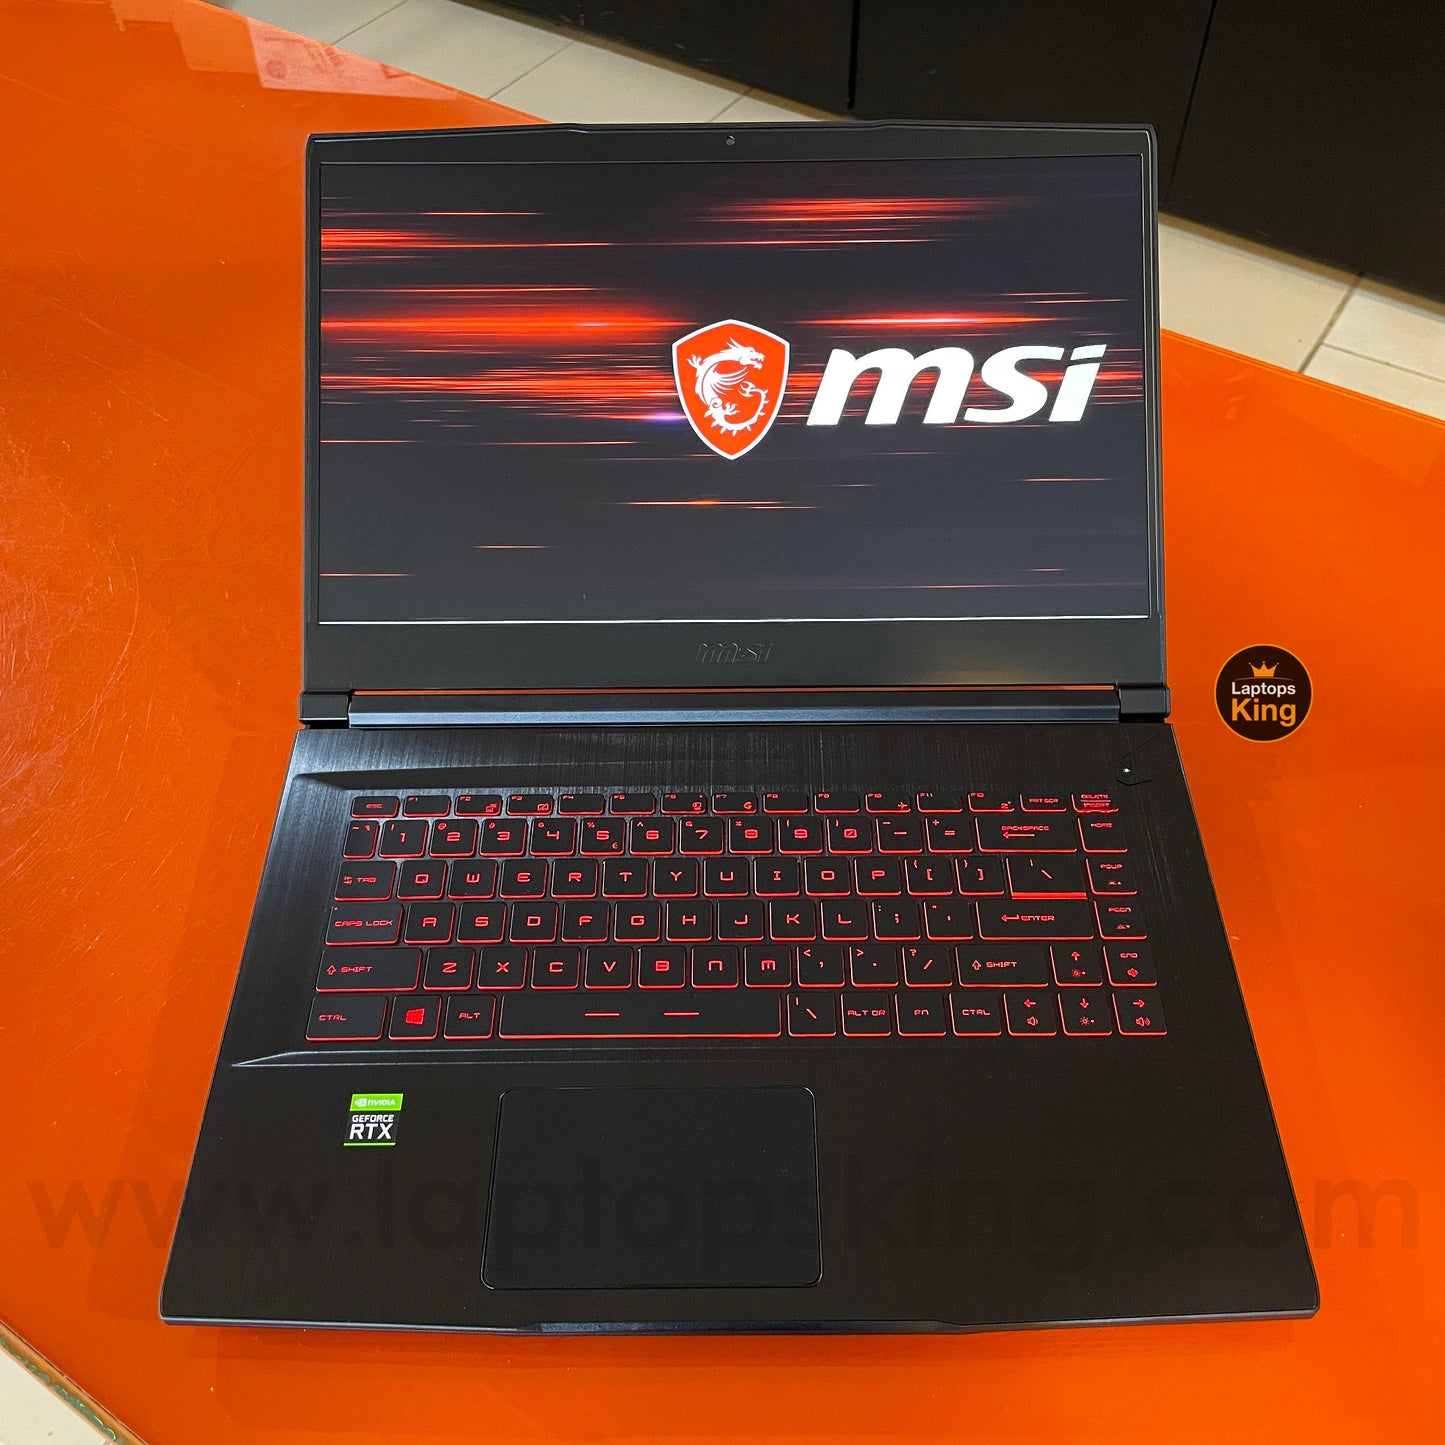 Msi GF65 Thin 10UE RTX 3060 144Hz Gaming Laptops (Brand New) Gaming laptop, Graphic Design laptop, best laptop for gaming, best laptop for graphic design, computer for sale Lebanon, laptop for video editing in Lebanon, laptop for sale Lebanon, best graphic design laptop,	best video editing laptop, best programming laptop, laptop for sale in Lebanon, laptops for sale in Lebanon, laptop for sale in Lebanon, buy computer Lebanon, buy laptop Lebanon.